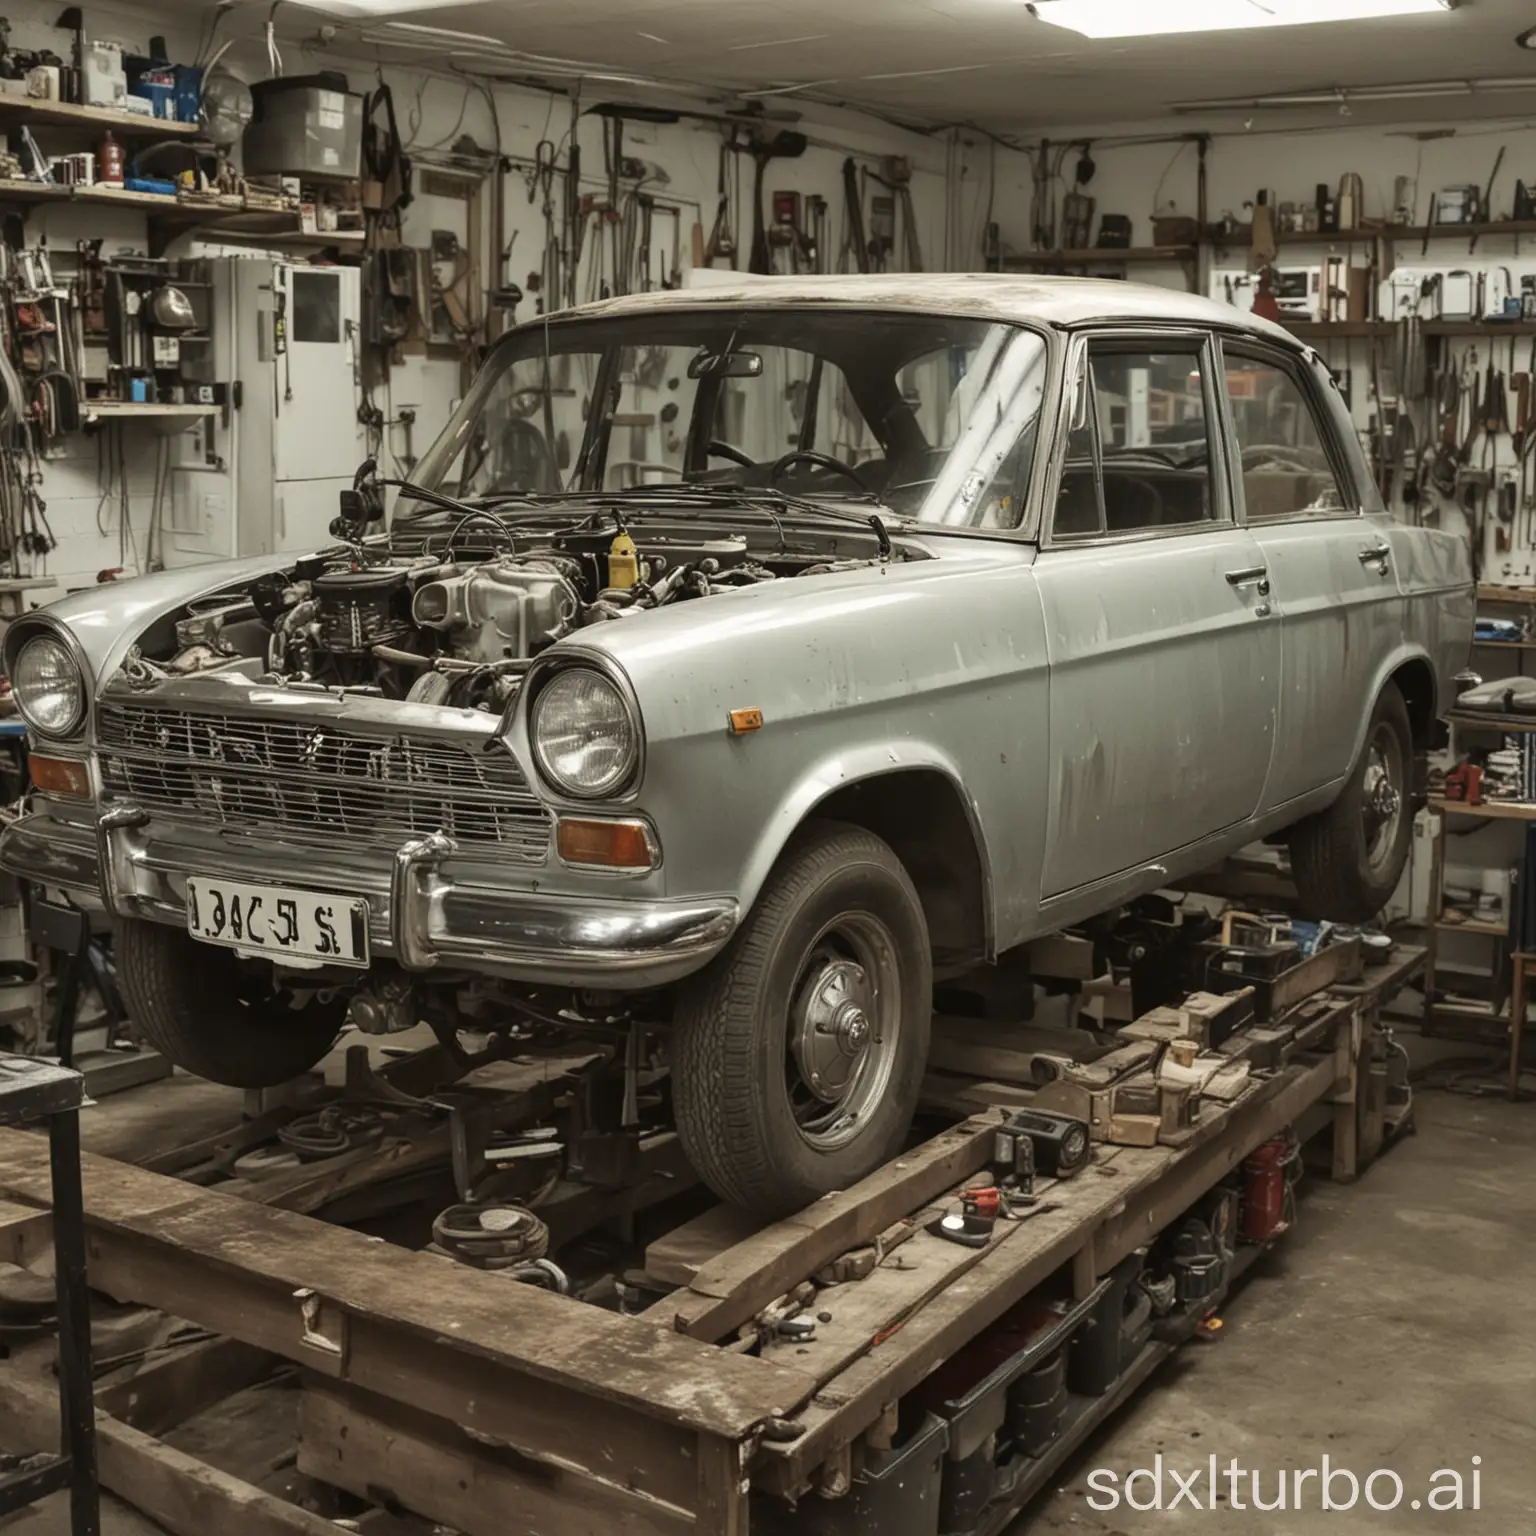 A car being worked on in a shop